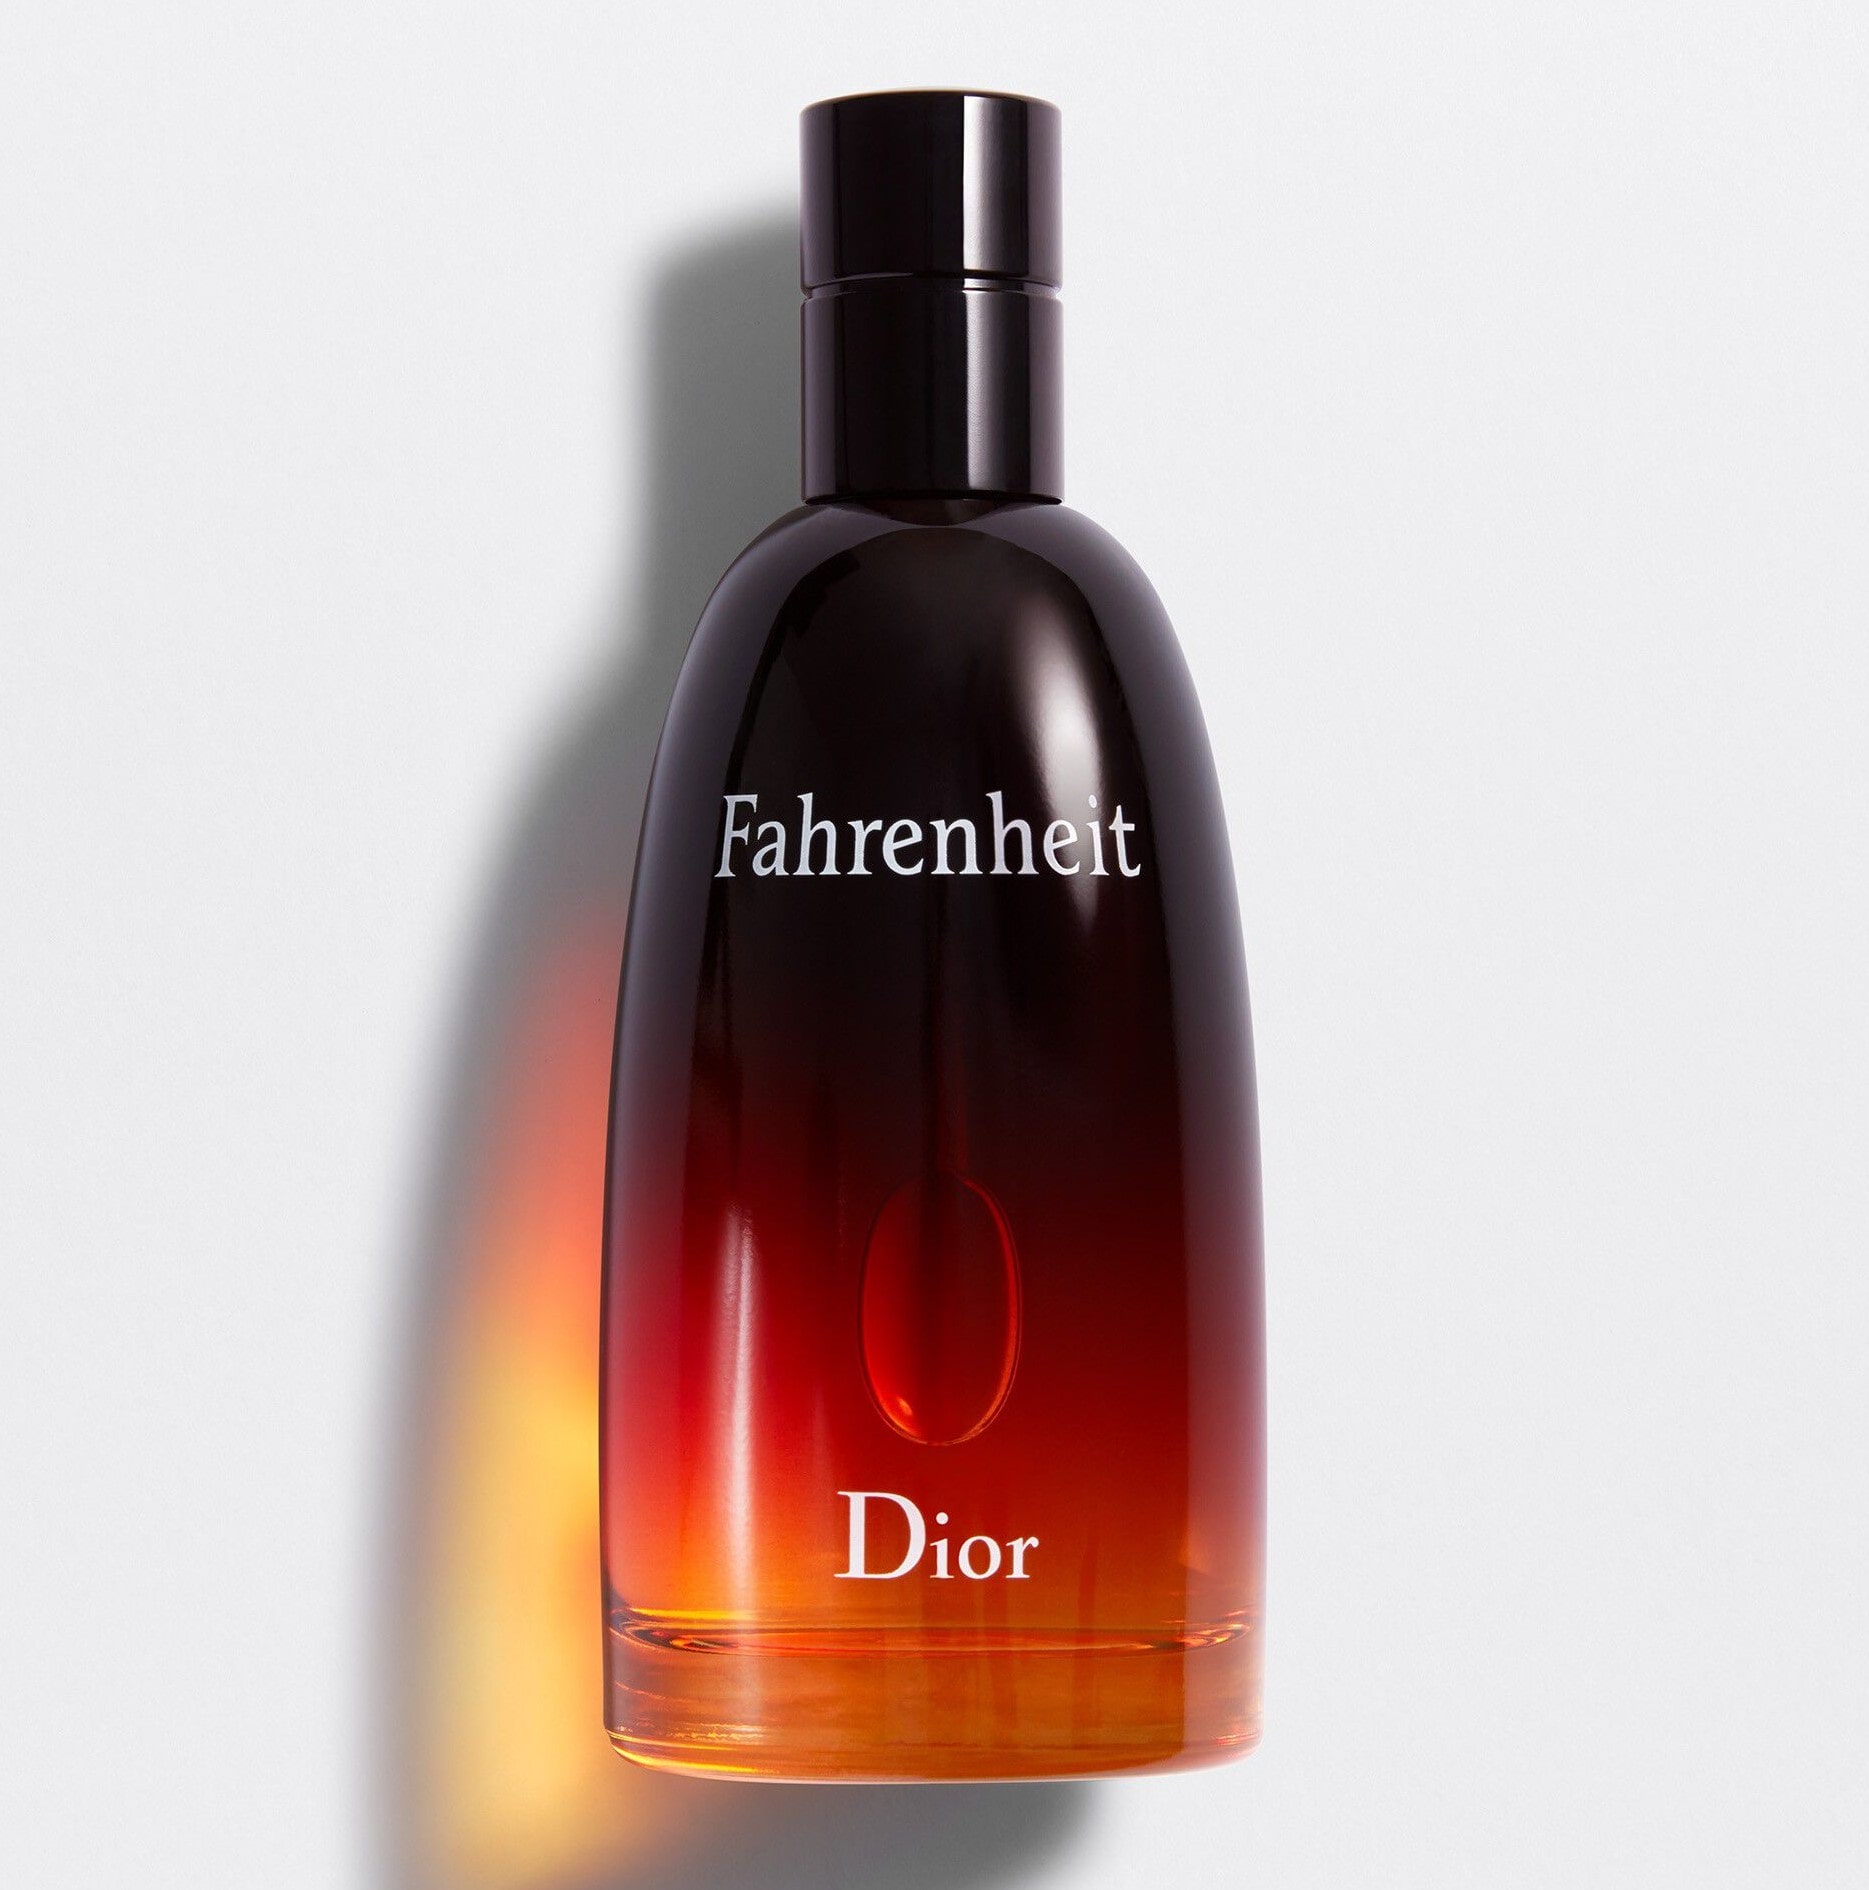 Dior Fahrenheit After Shave for Men 100 ml by Dior